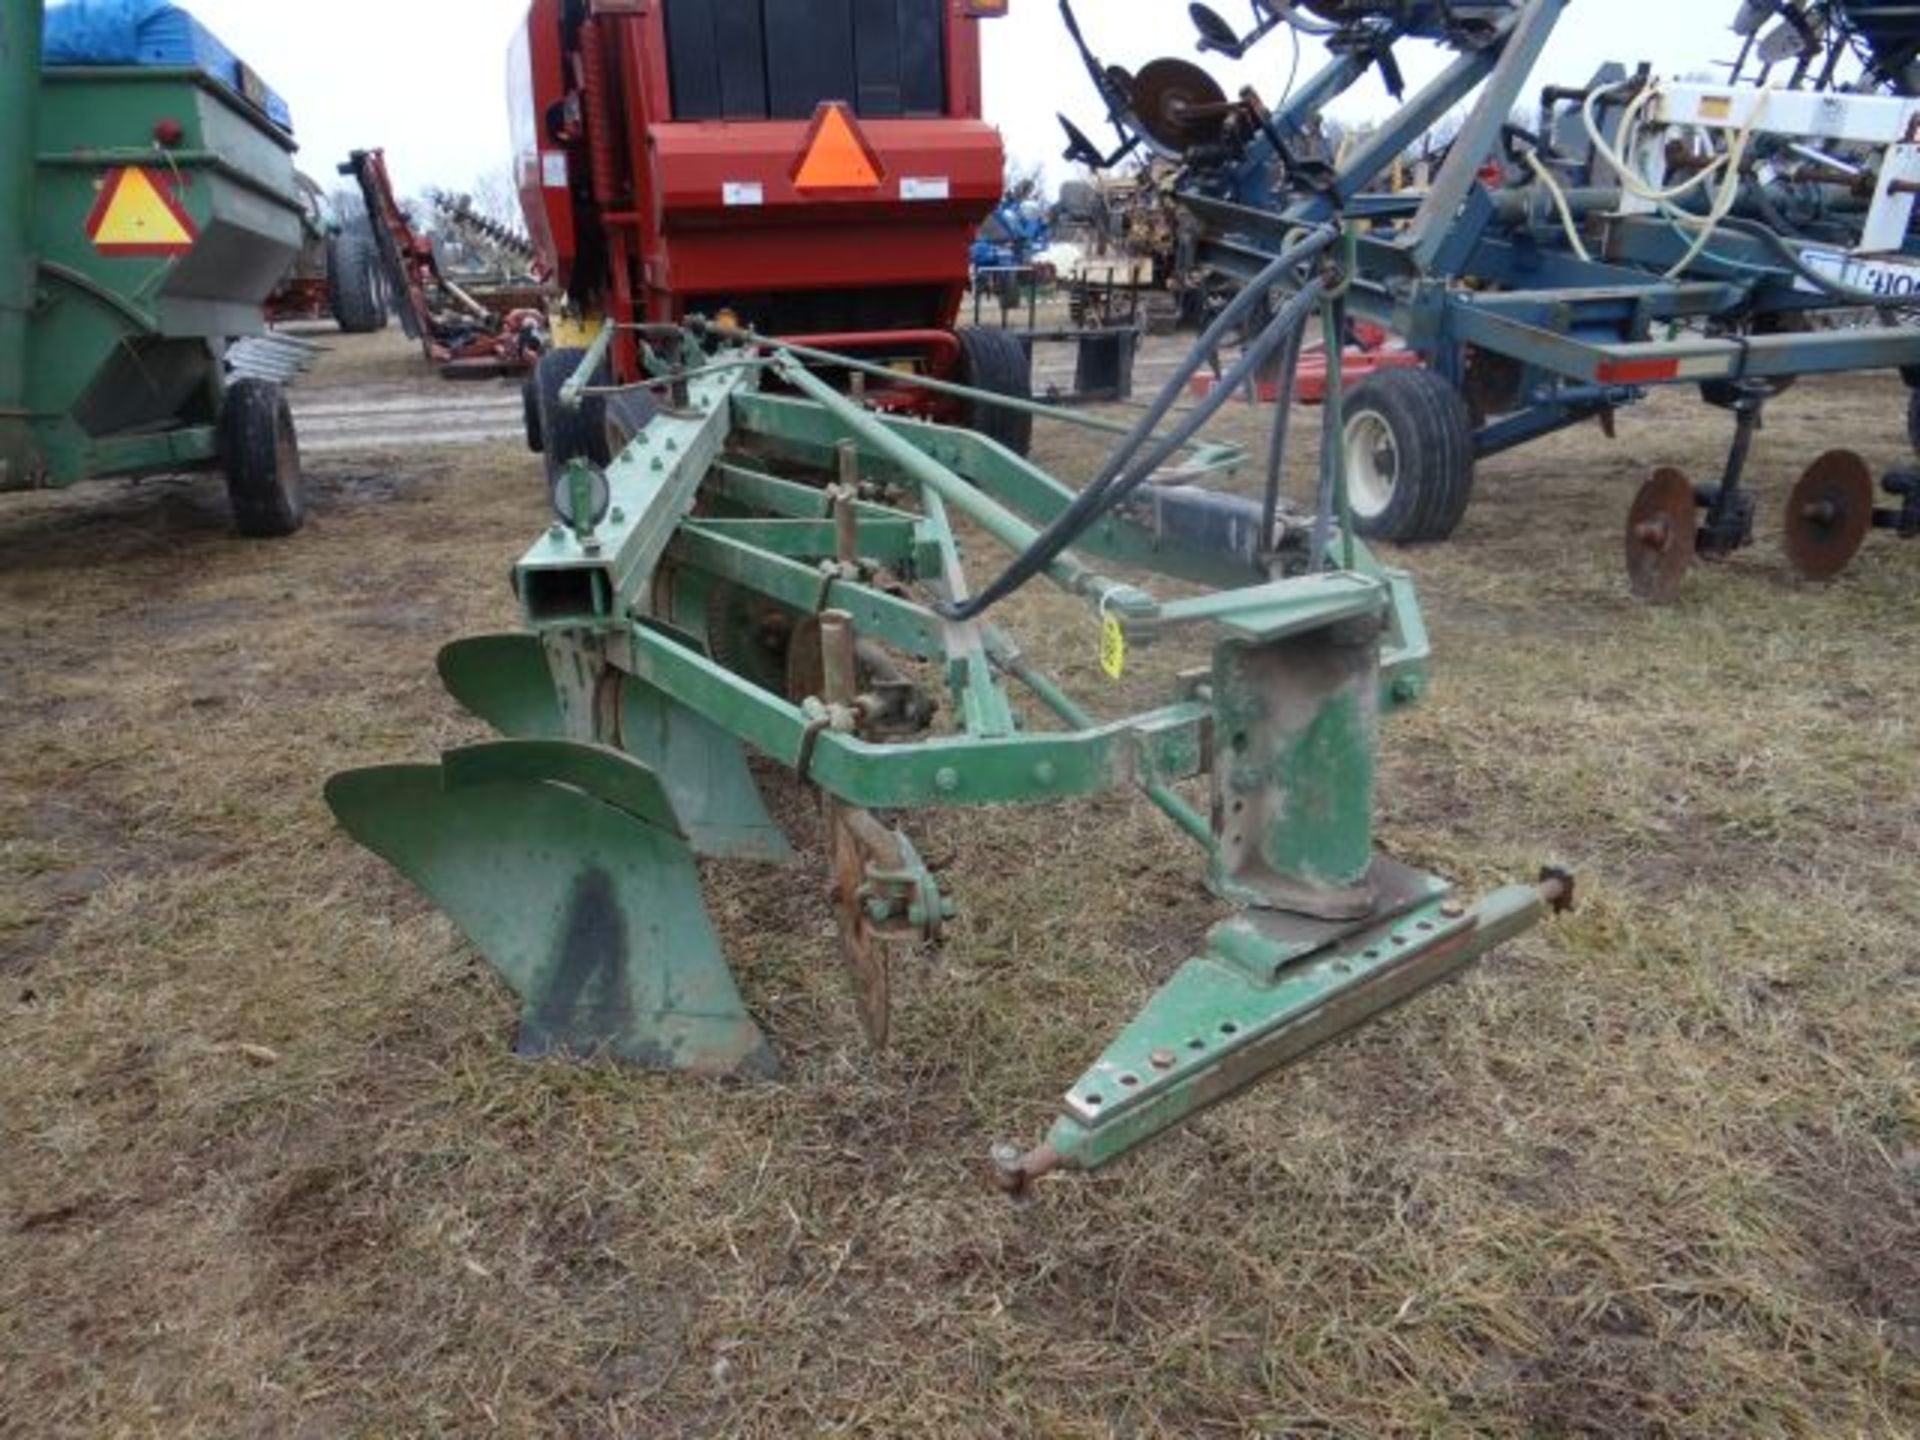 JD F145A Plow 5 Bottom, Manual in the Shed